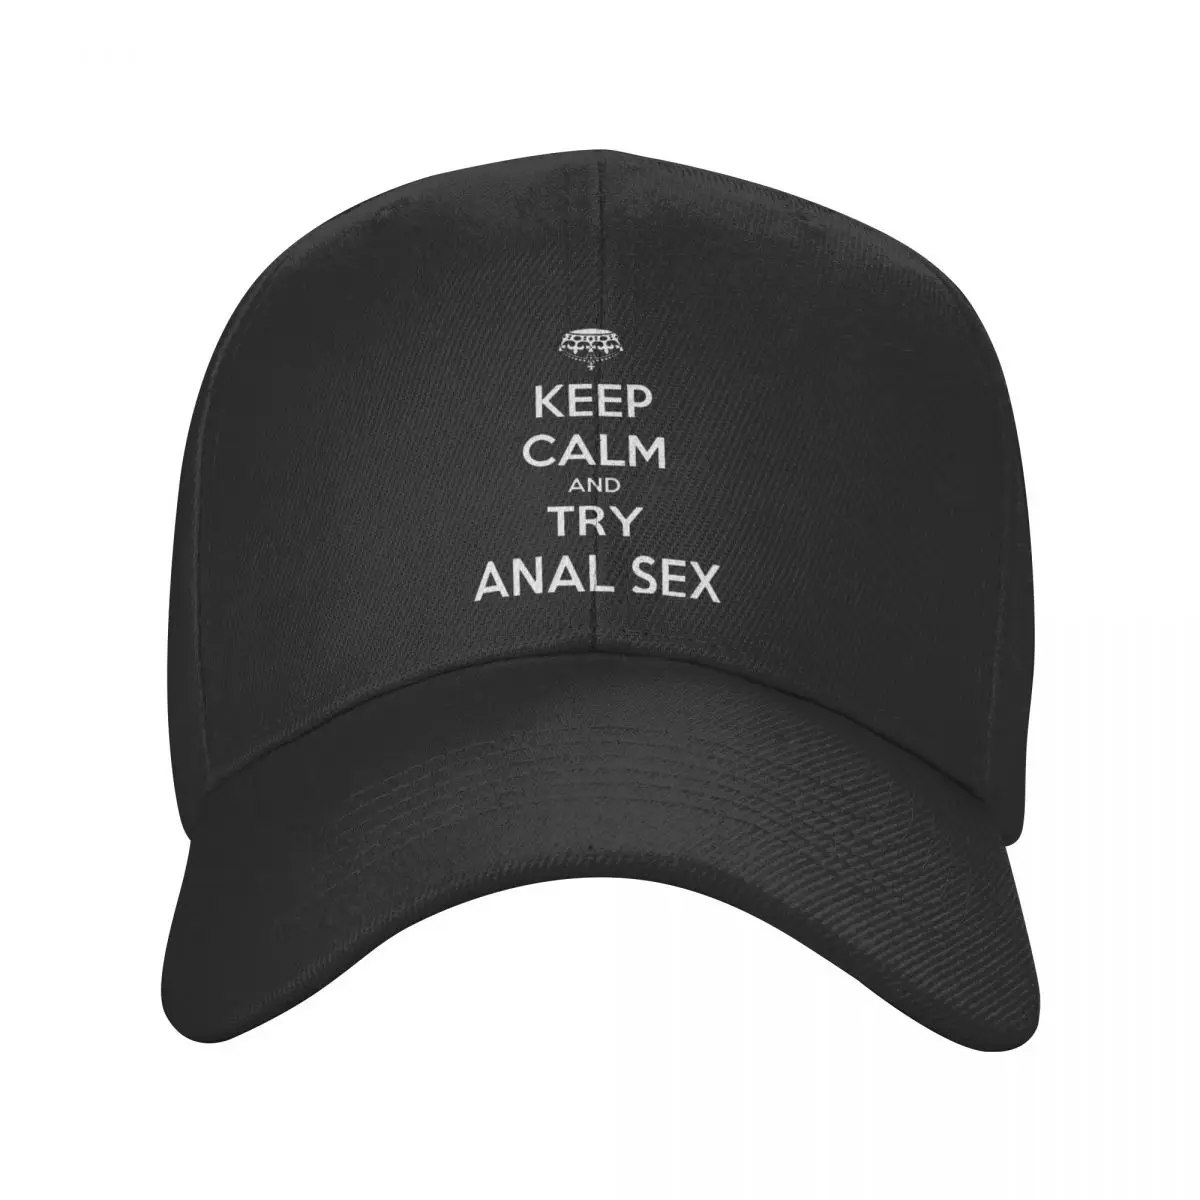 Classic Keep Calm And Try Anal Sex Baseball Cap For Women Men Breathable Dad Hat Sun Protection Snapback Caps - Baseball Caps photo